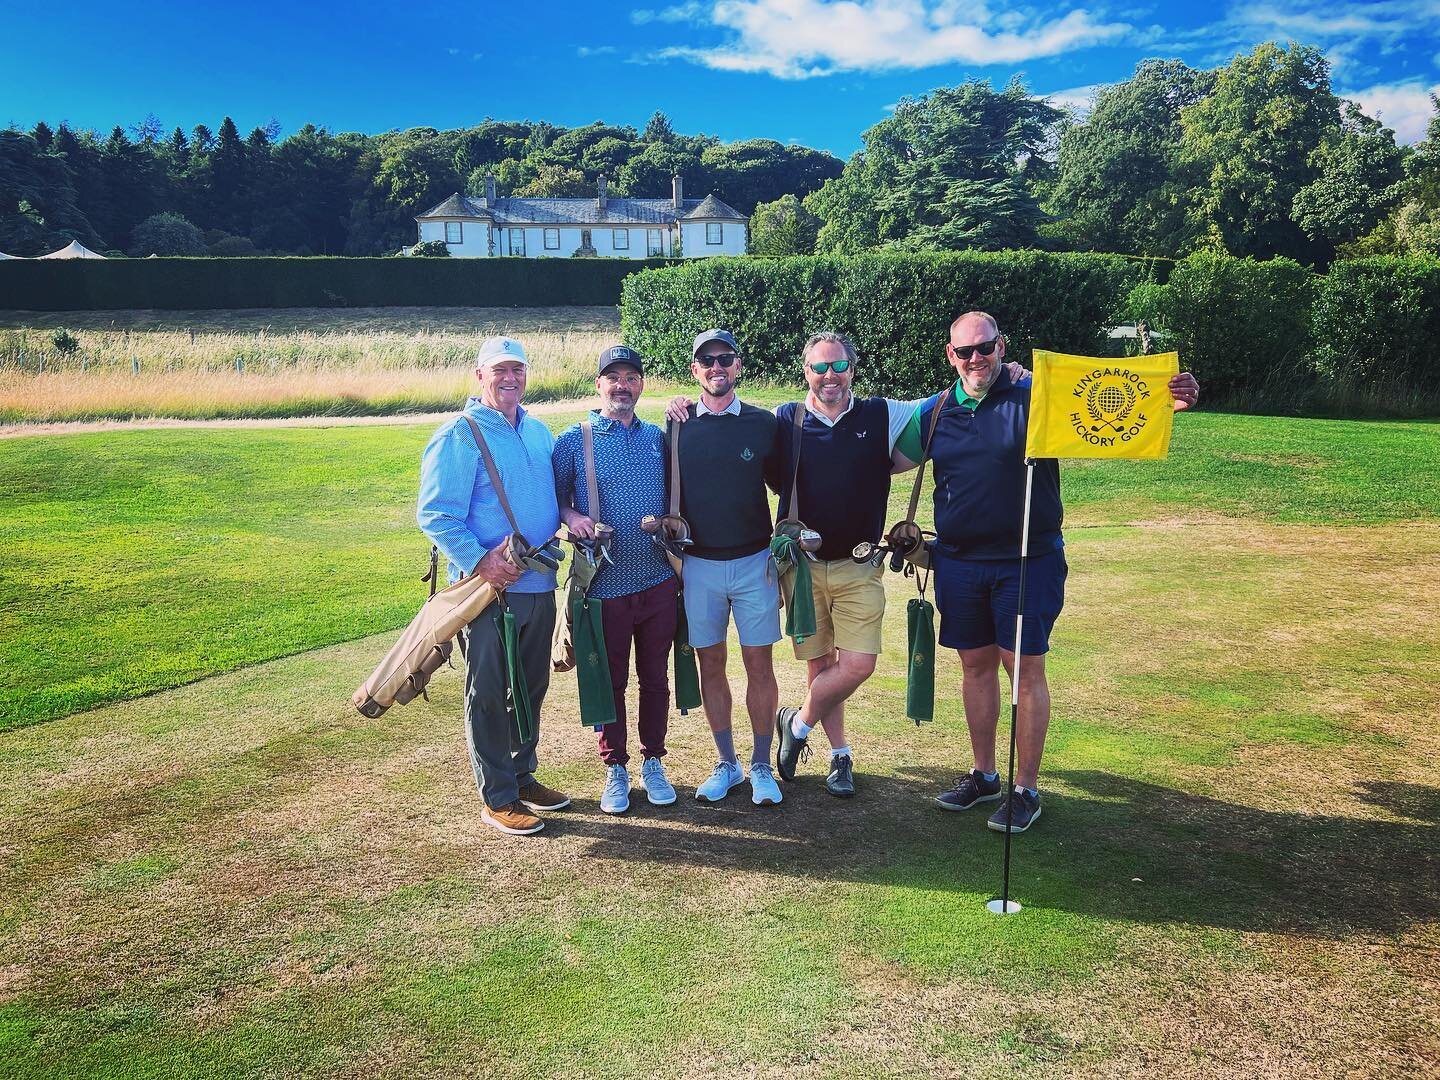 We had an amazing week hosting The Emmott Father and Sons 60th birthday trip for Peter. It was an absolute joy to have the group here with us in Scotland. As we say in Scotland lads, Haste ye back. Safe travels home to The Emmotts. 🏌️&zwj;♂️💙🏌️&zw